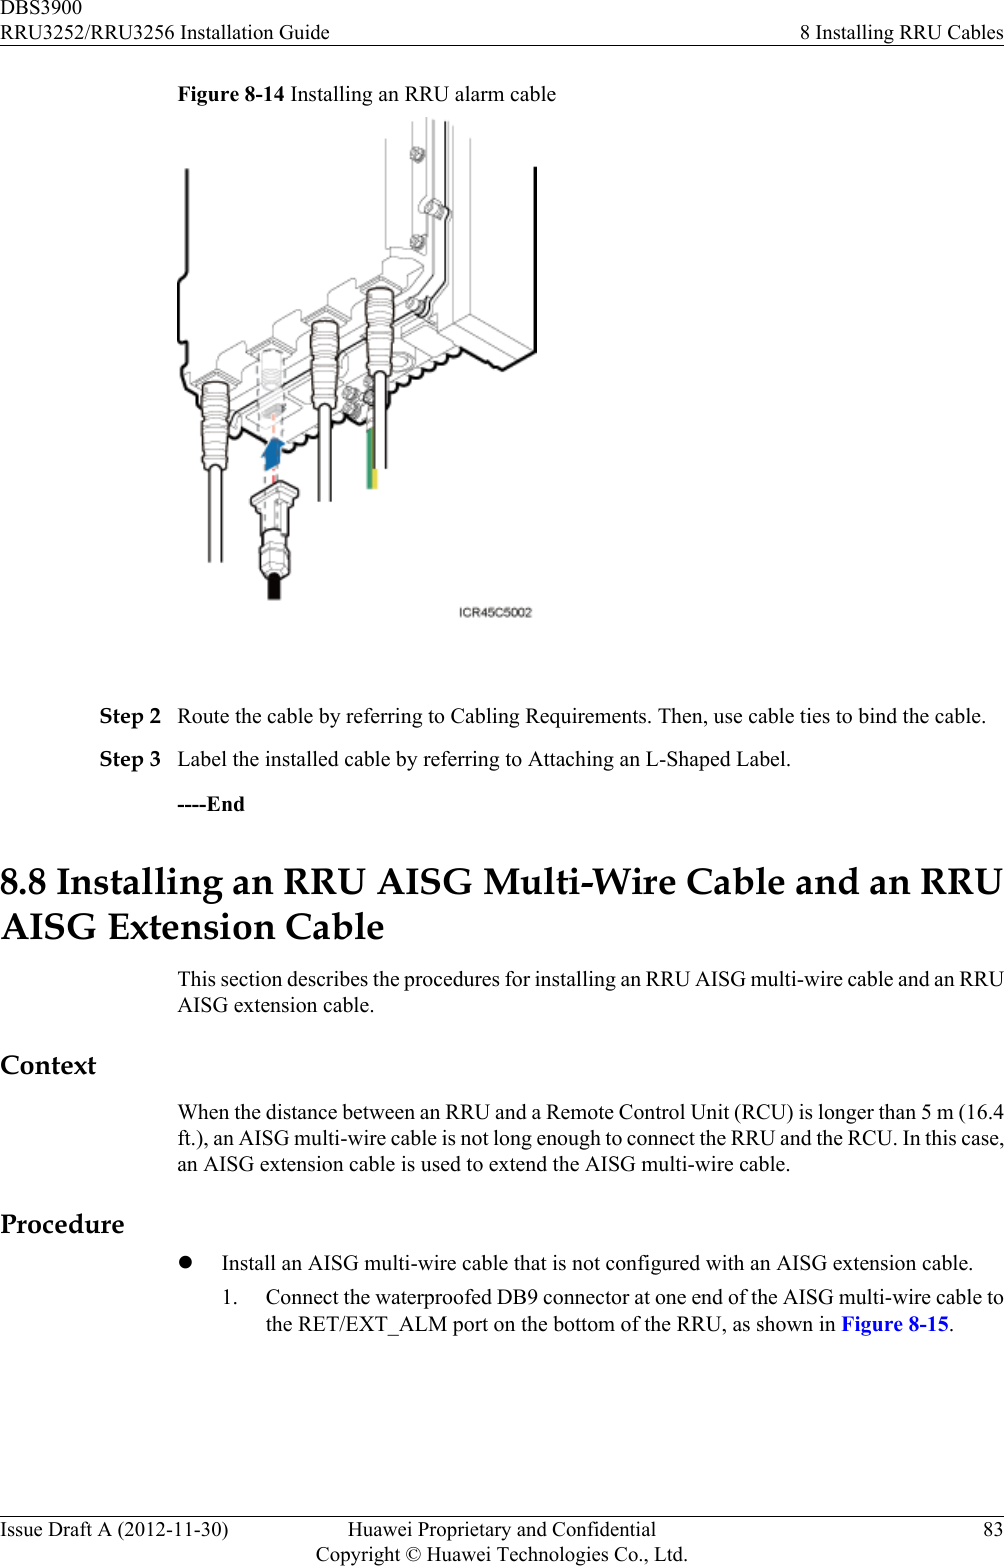 Figure 8-14 Installing an RRU alarm cable Step 2 Route the cable by referring to Cabling Requirements. Then, use cable ties to bind the cable.Step 3 Label the installed cable by referring to Attaching an L-Shaped Label.----End8.8 Installing an RRU AISG Multi-Wire Cable and an RRUAISG Extension CableThis section describes the procedures for installing an RRU AISG multi-wire cable and an RRUAISG extension cable.ContextWhen the distance between an RRU and a Remote Control Unit (RCU) is longer than 5 m (16.4ft.), an AISG multi-wire cable is not long enough to connect the RRU and the RCU. In this case,an AISG extension cable is used to extend the AISG multi-wire cable.ProcedurelInstall an AISG multi-wire cable that is not configured with an AISG extension cable.1. Connect the waterproofed DB9 connector at one end of the AISG multi-wire cable tothe RET/EXT_ALM port on the bottom of the RRU, as shown in Figure 8-15.DBS3900RRU3252/RRU3256 Installation Guide 8 Installing RRU CablesIssue Draft A (2012-11-30) Huawei Proprietary and ConfidentialCopyright © Huawei Technologies Co., Ltd.83